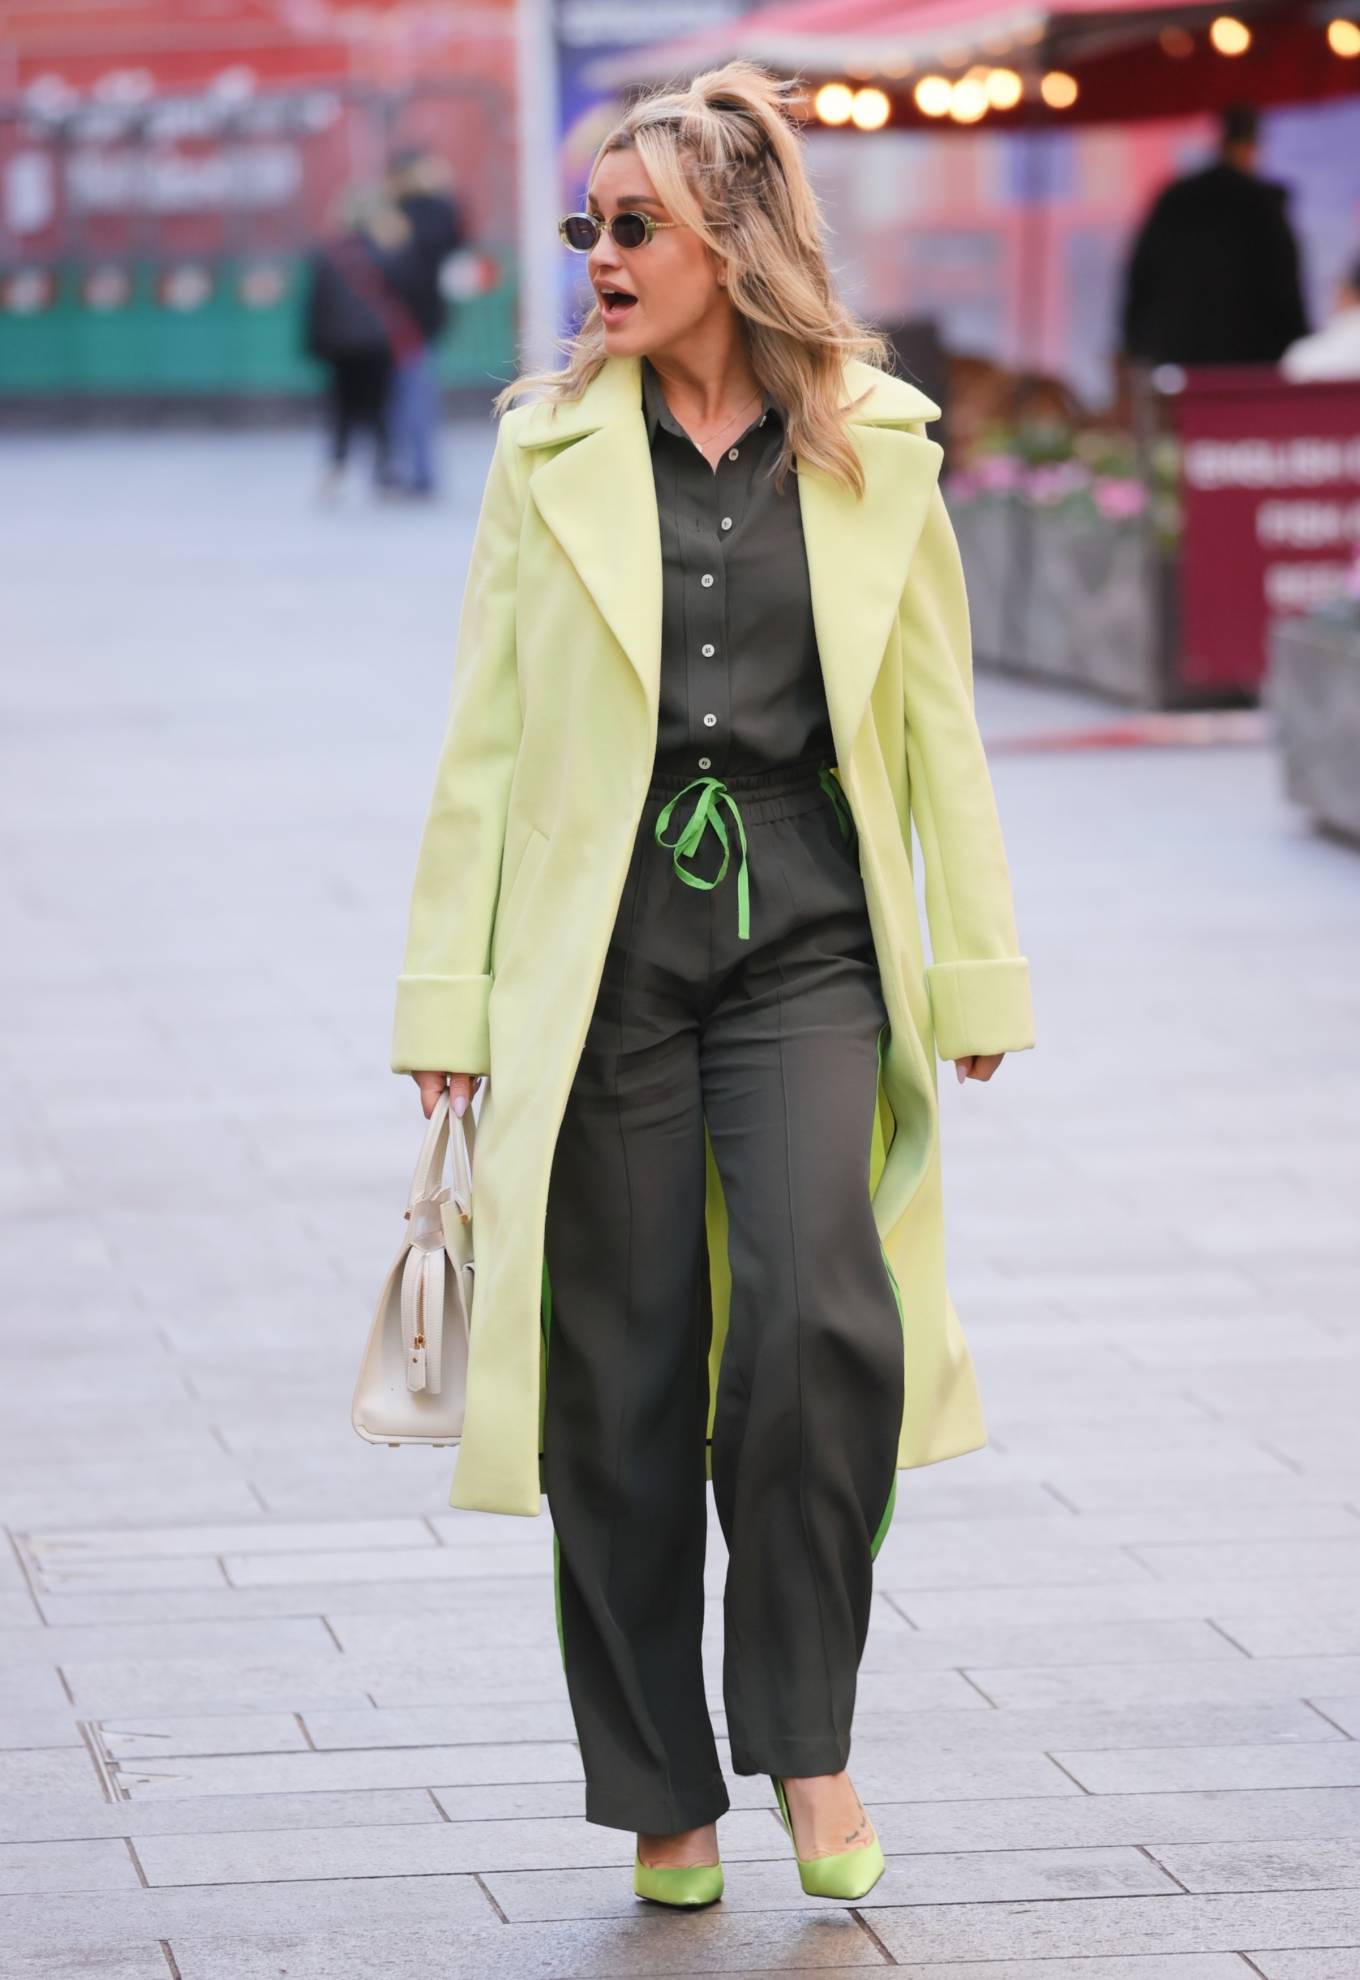 Ashley Roberts 2021 : Ashley Roberts – In a lime green trench coat at Heart radio in London-29